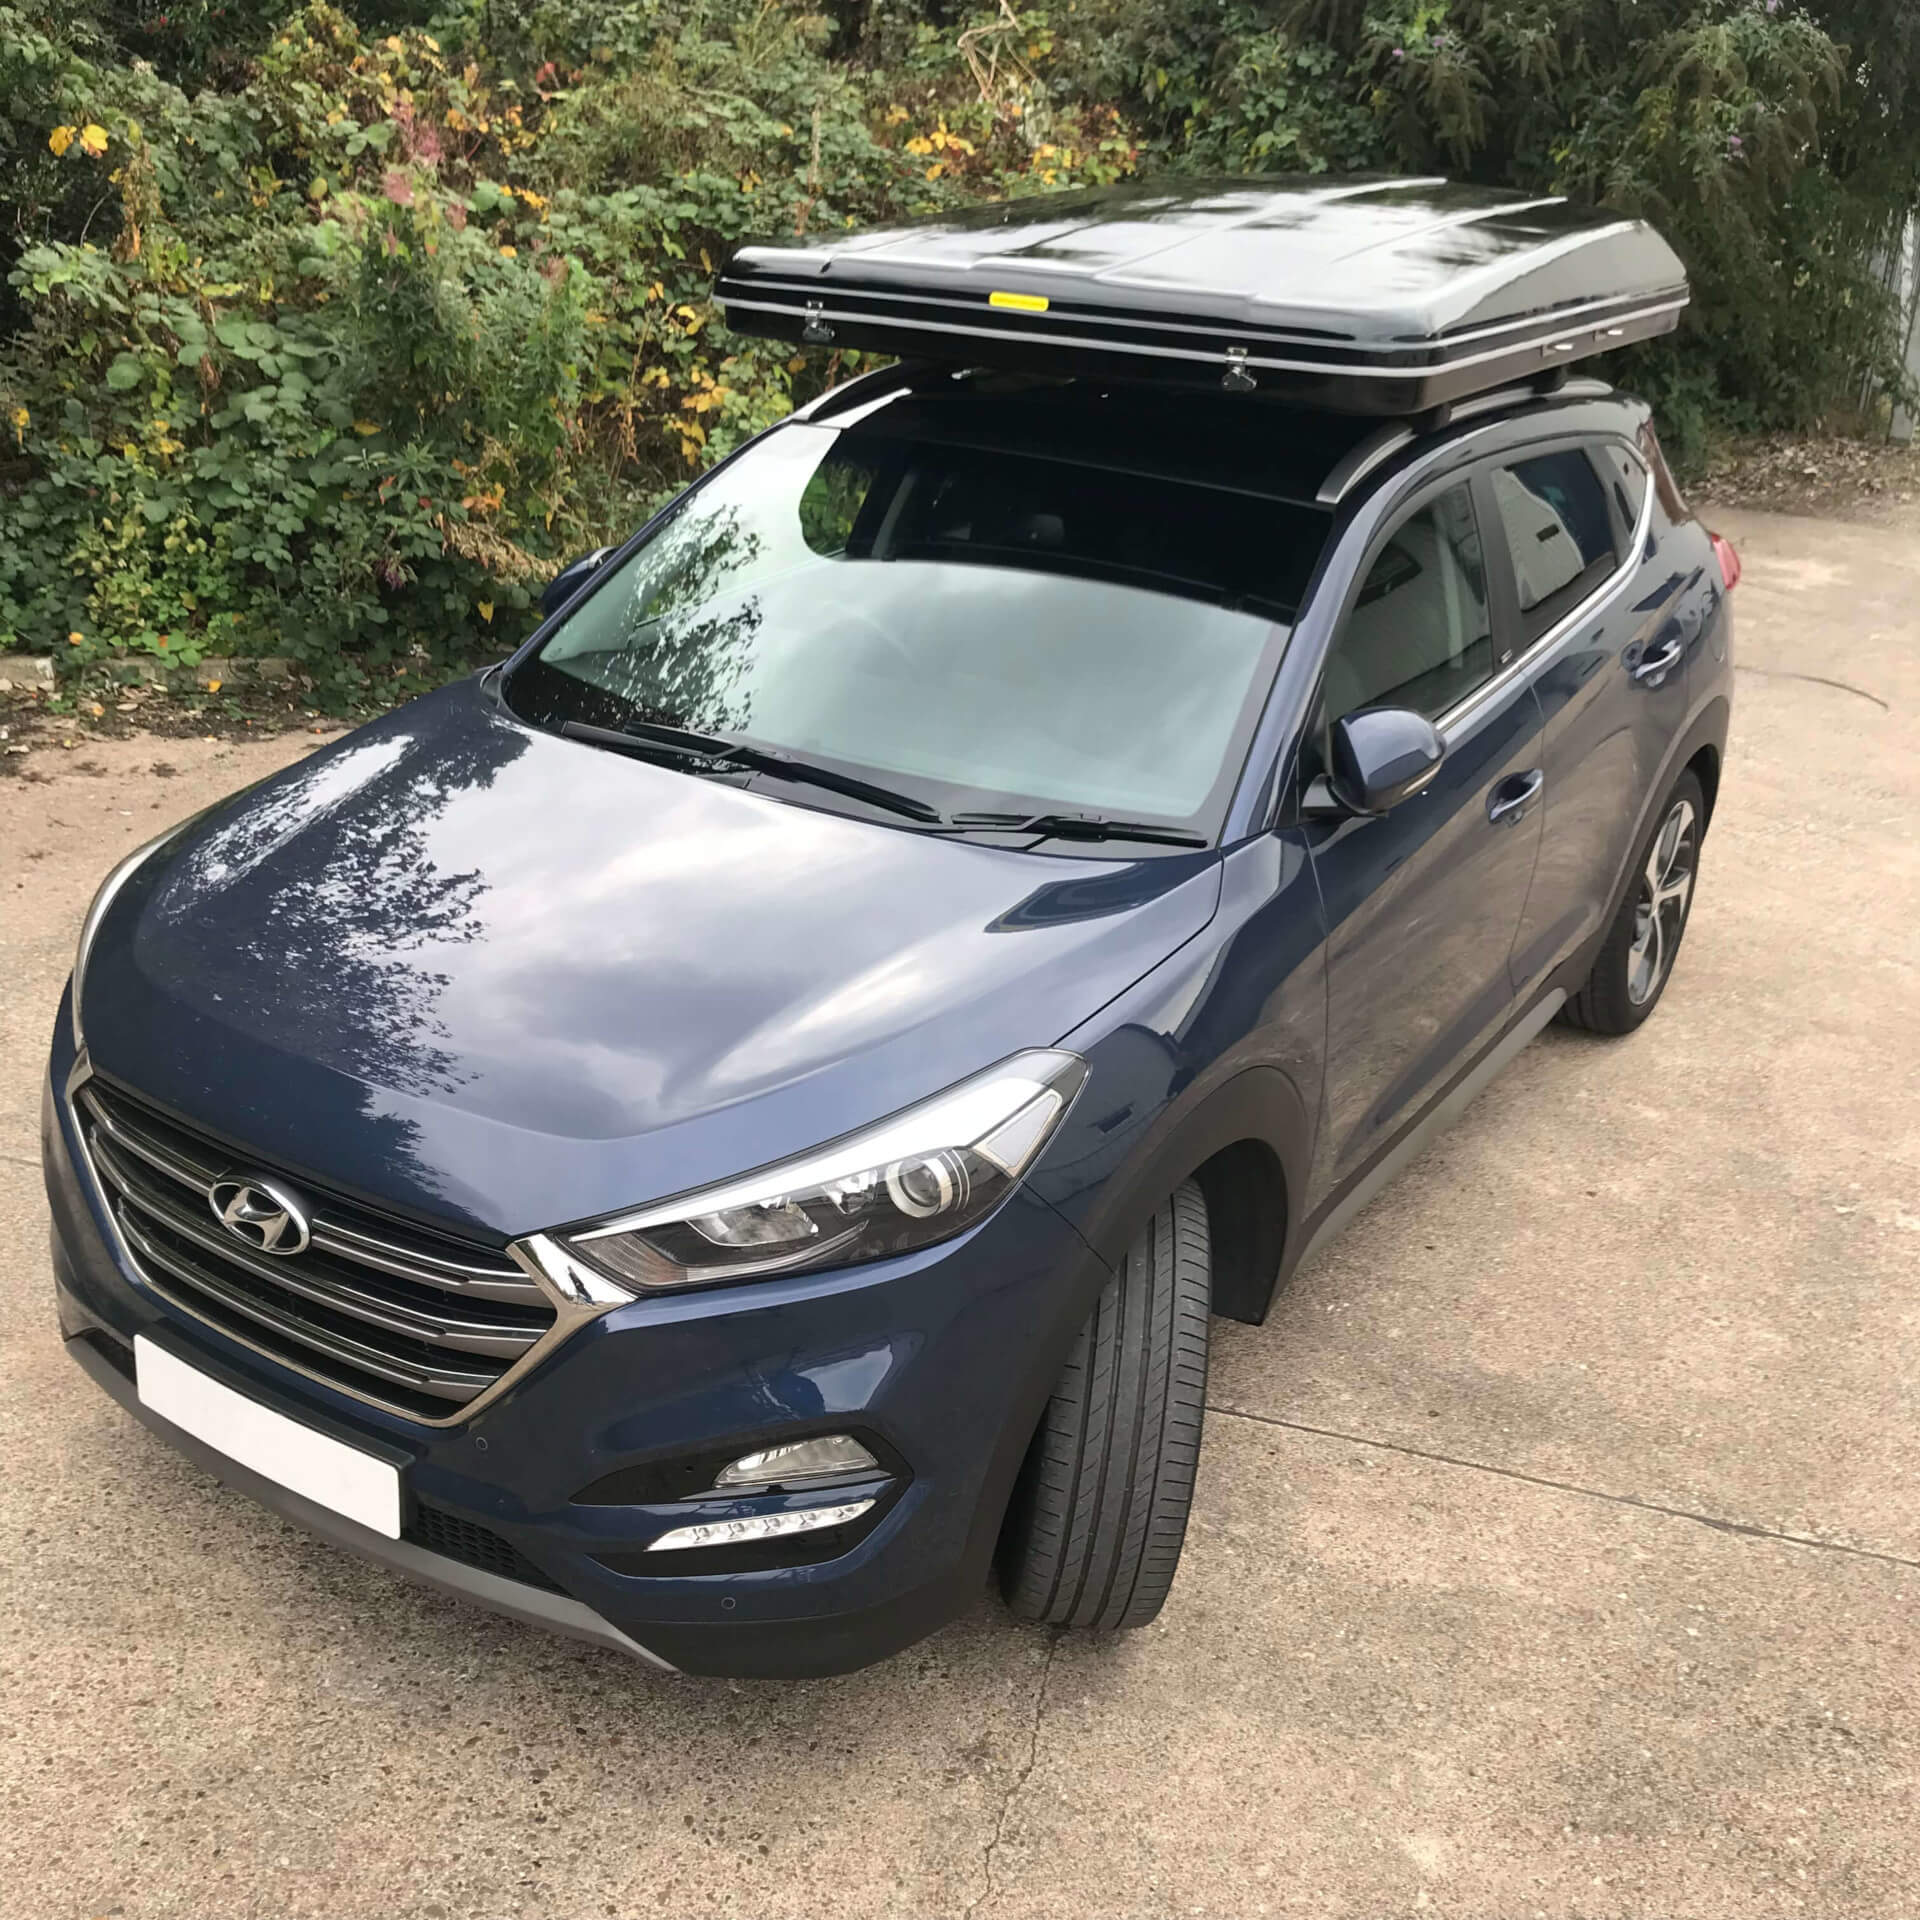 Direct4x4 accessories for Hyundai Tucson vehicles with a photo of a dark blue Hyundai Tucson parked up fitted with one of our hard shell roof tents on top